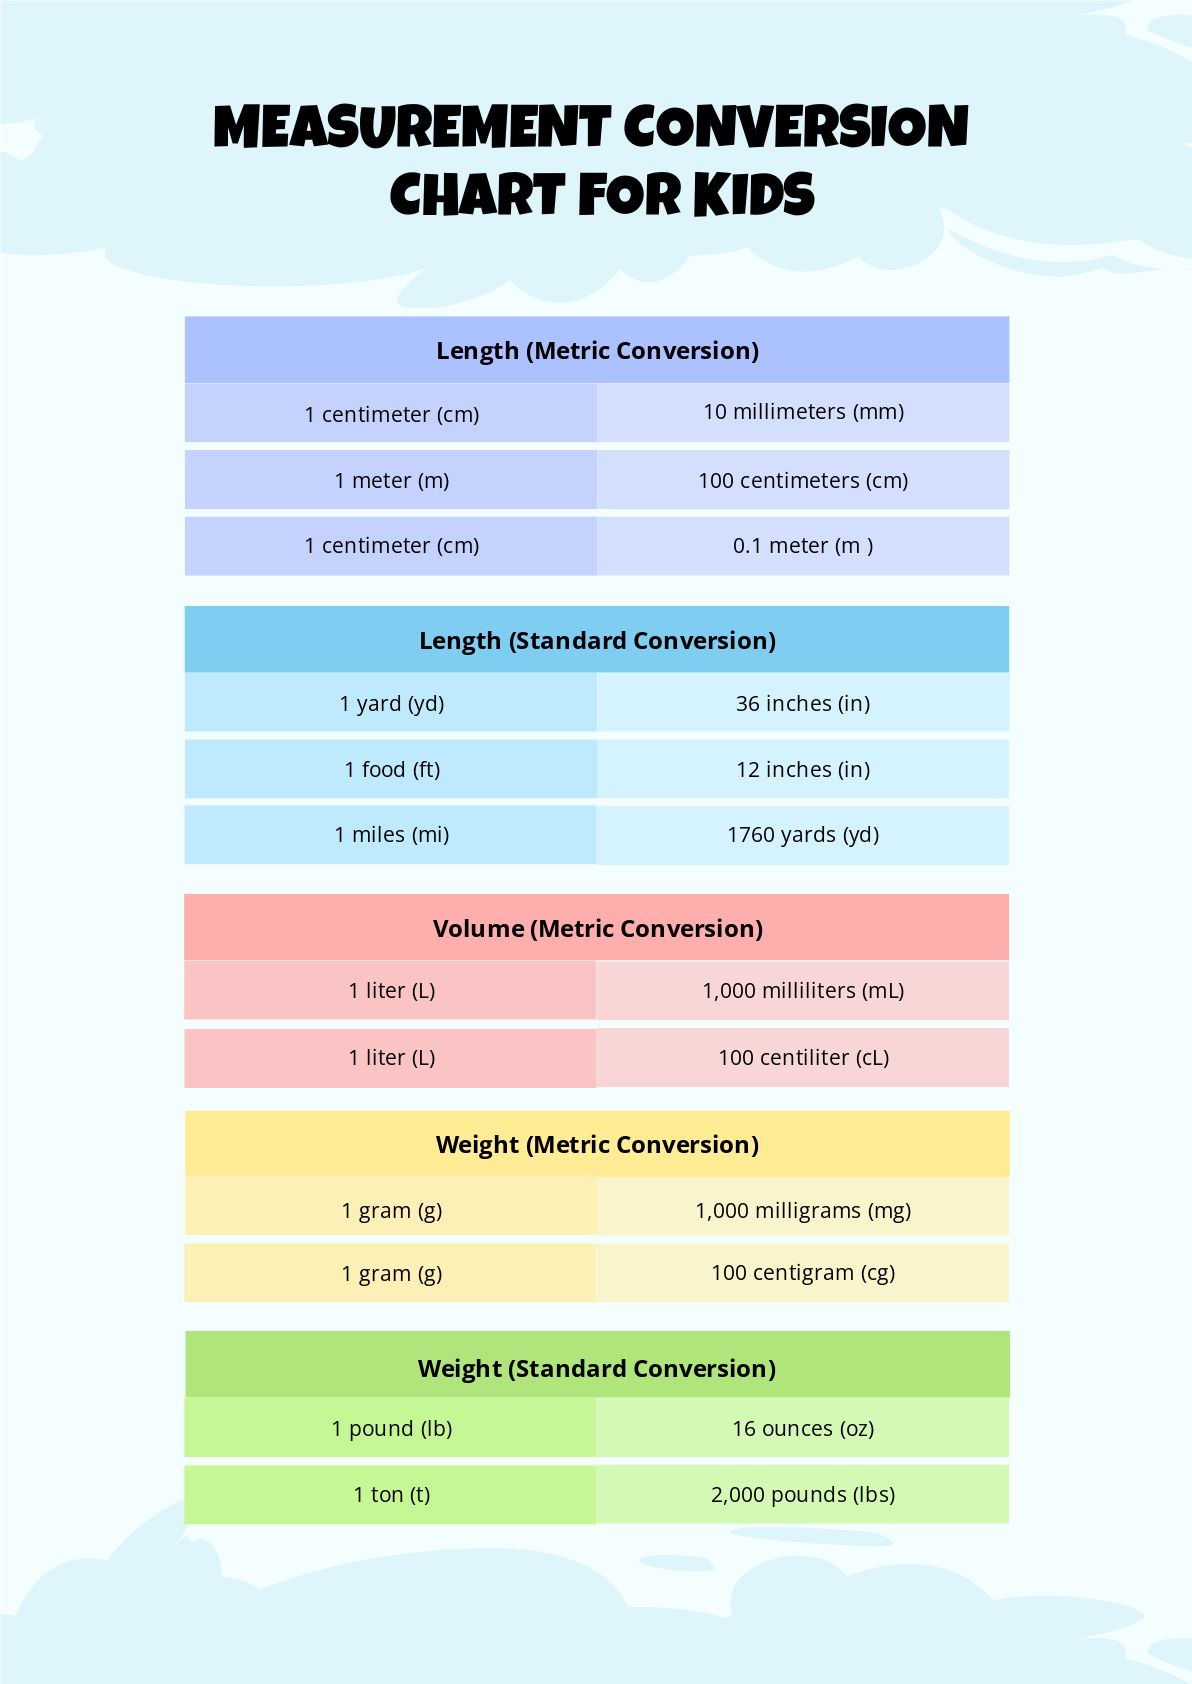 Measurement Conversion Chart For Kids in PDF - Download